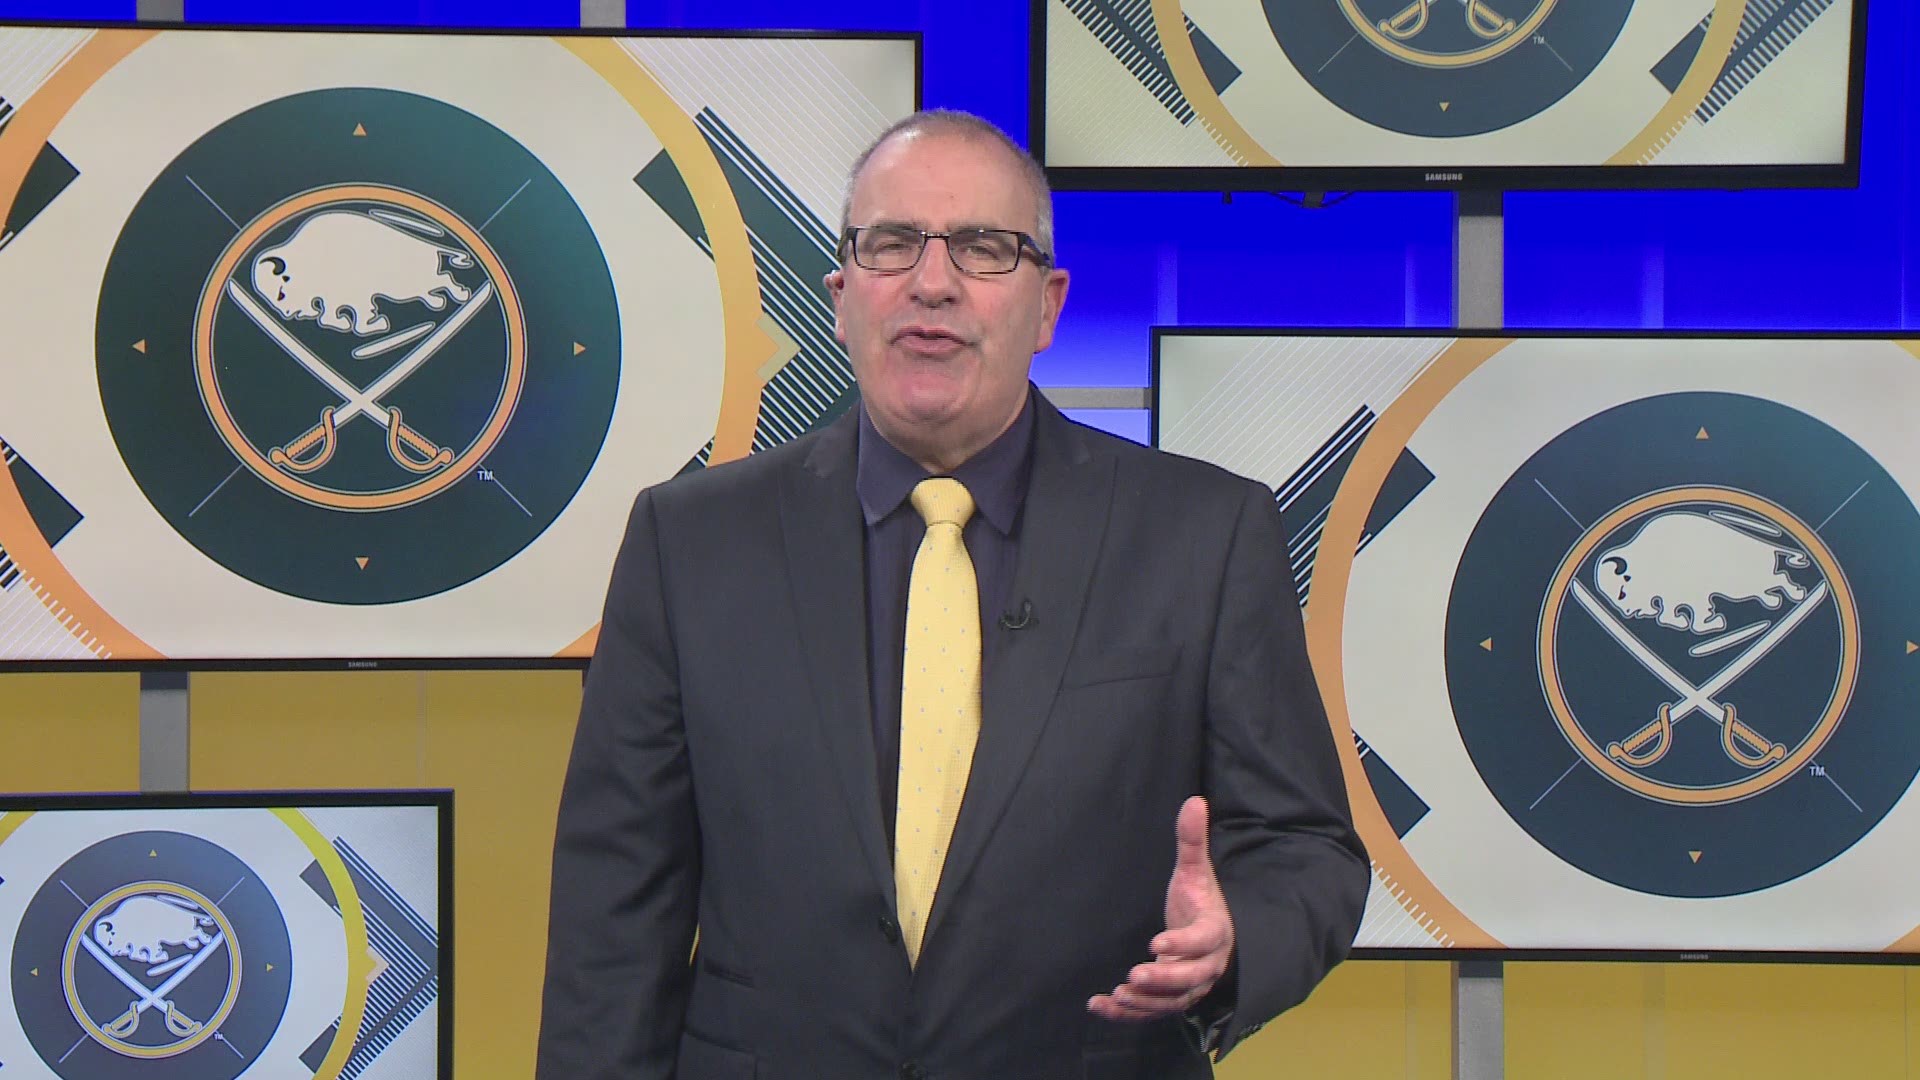 The Stanley Cup playoffs make Stu Boyar wonder about how the Sabres can return to the post season.